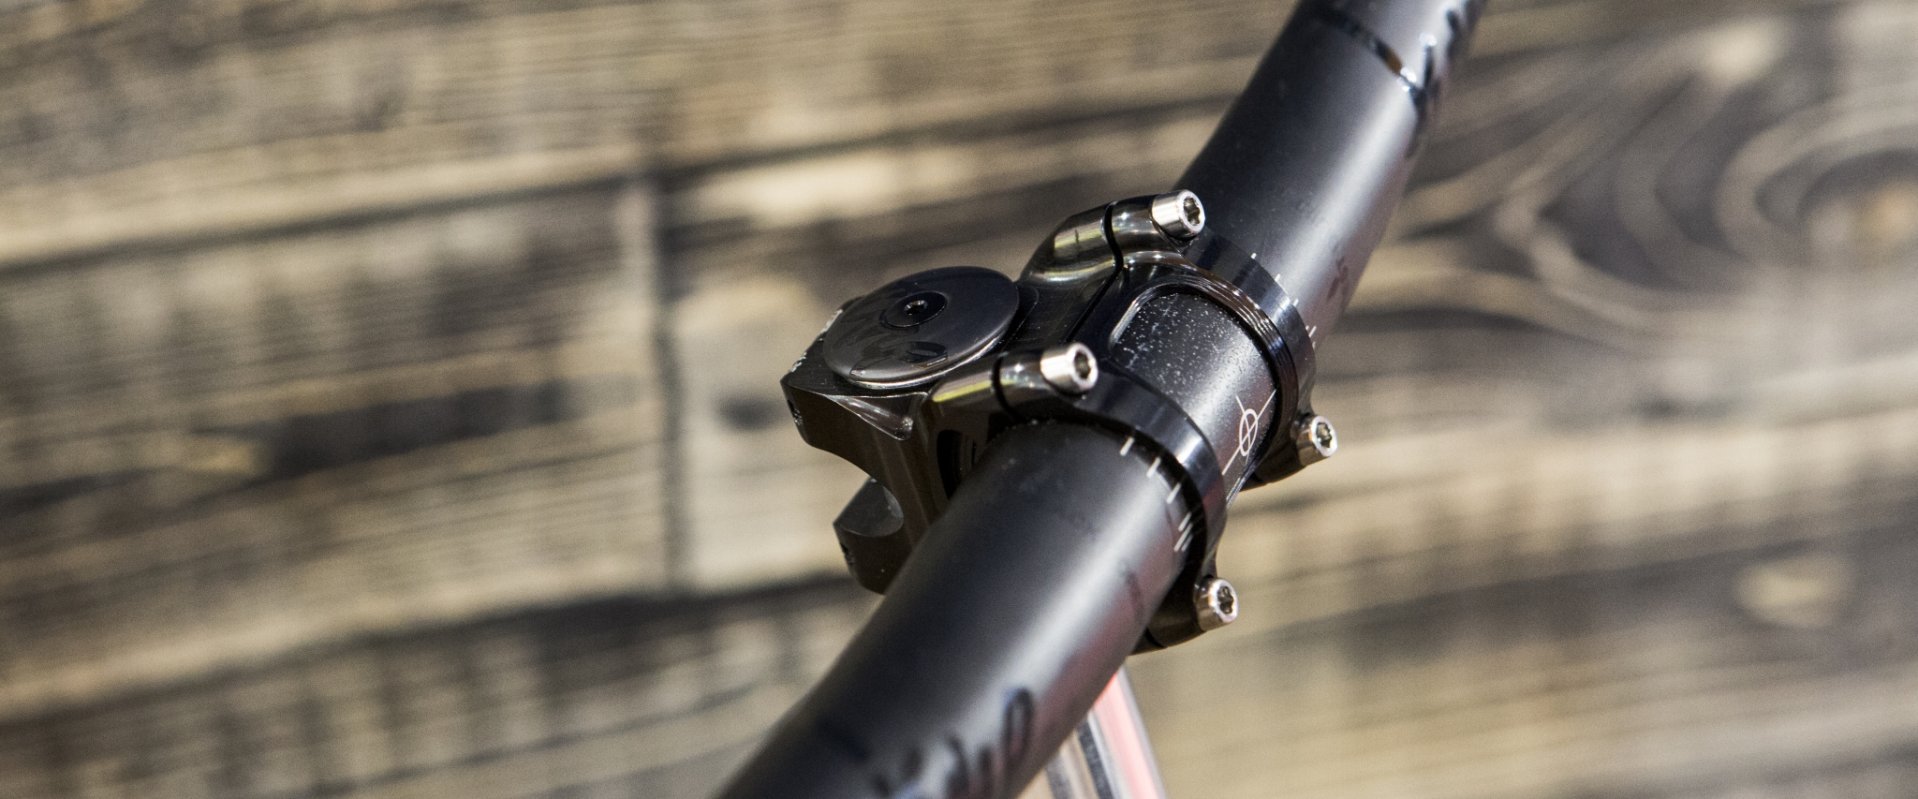 Made for heavy hitters, tune’s lightweight Enduro stem.